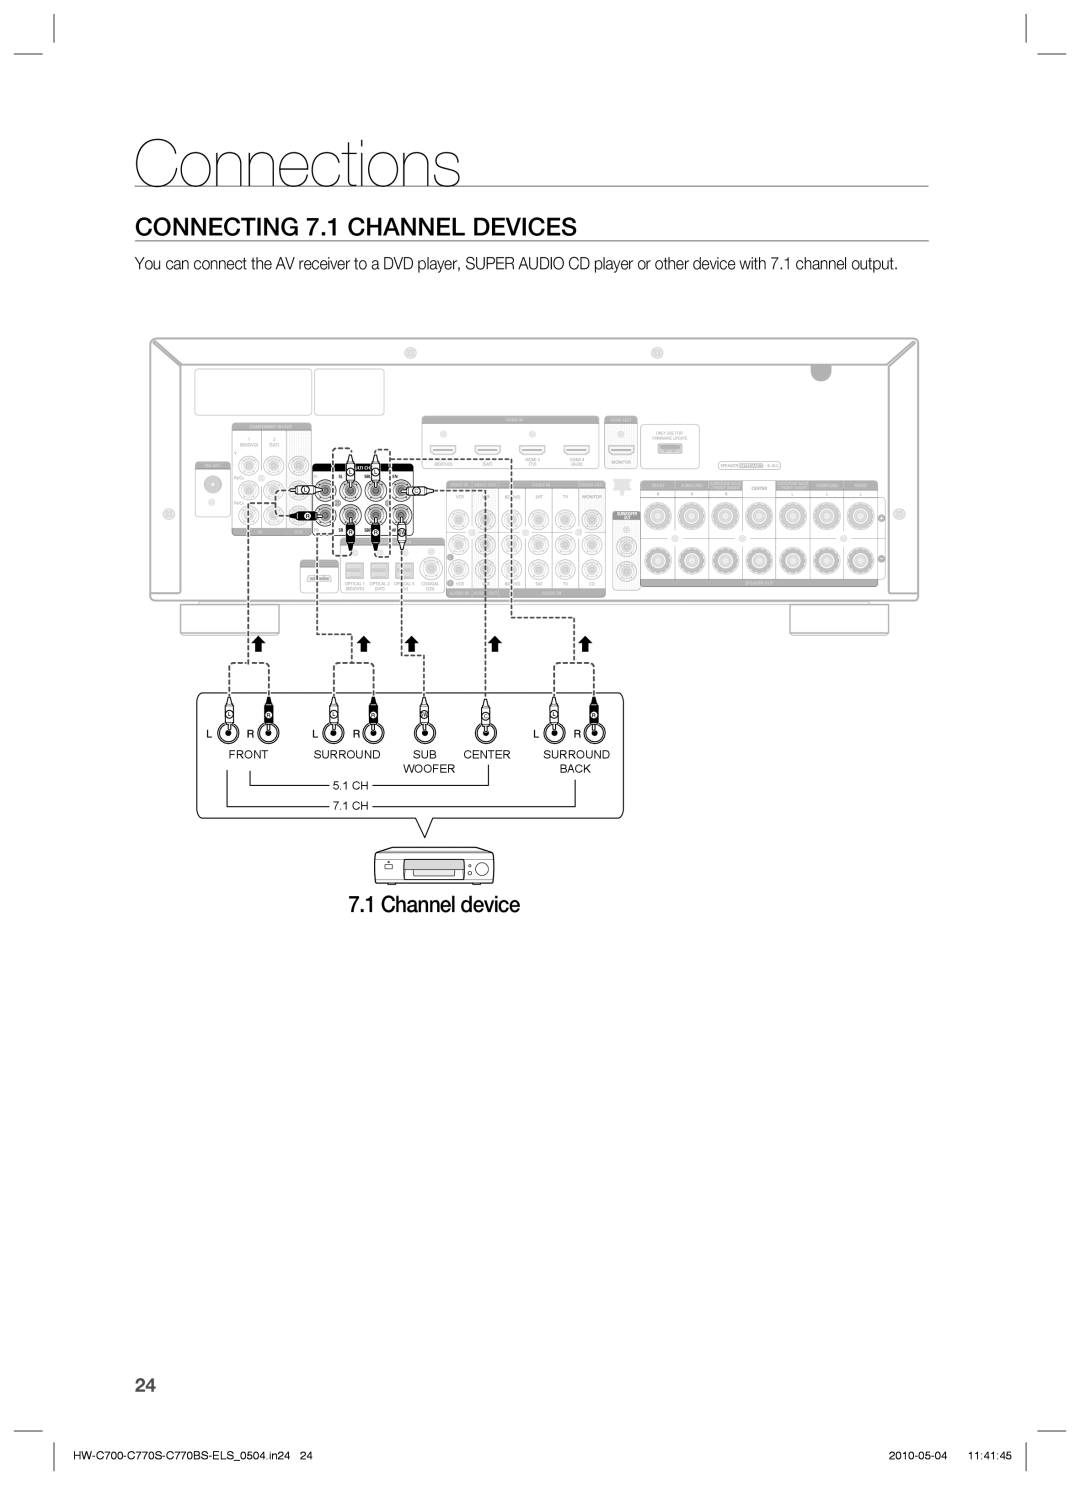 Samsung HW-C700B/XEE manual Connections, CONNECTING 7.1 CHANNEL DEVICES, Channel device, HW-C700-C770S-C770BS-ELS0504.in24 